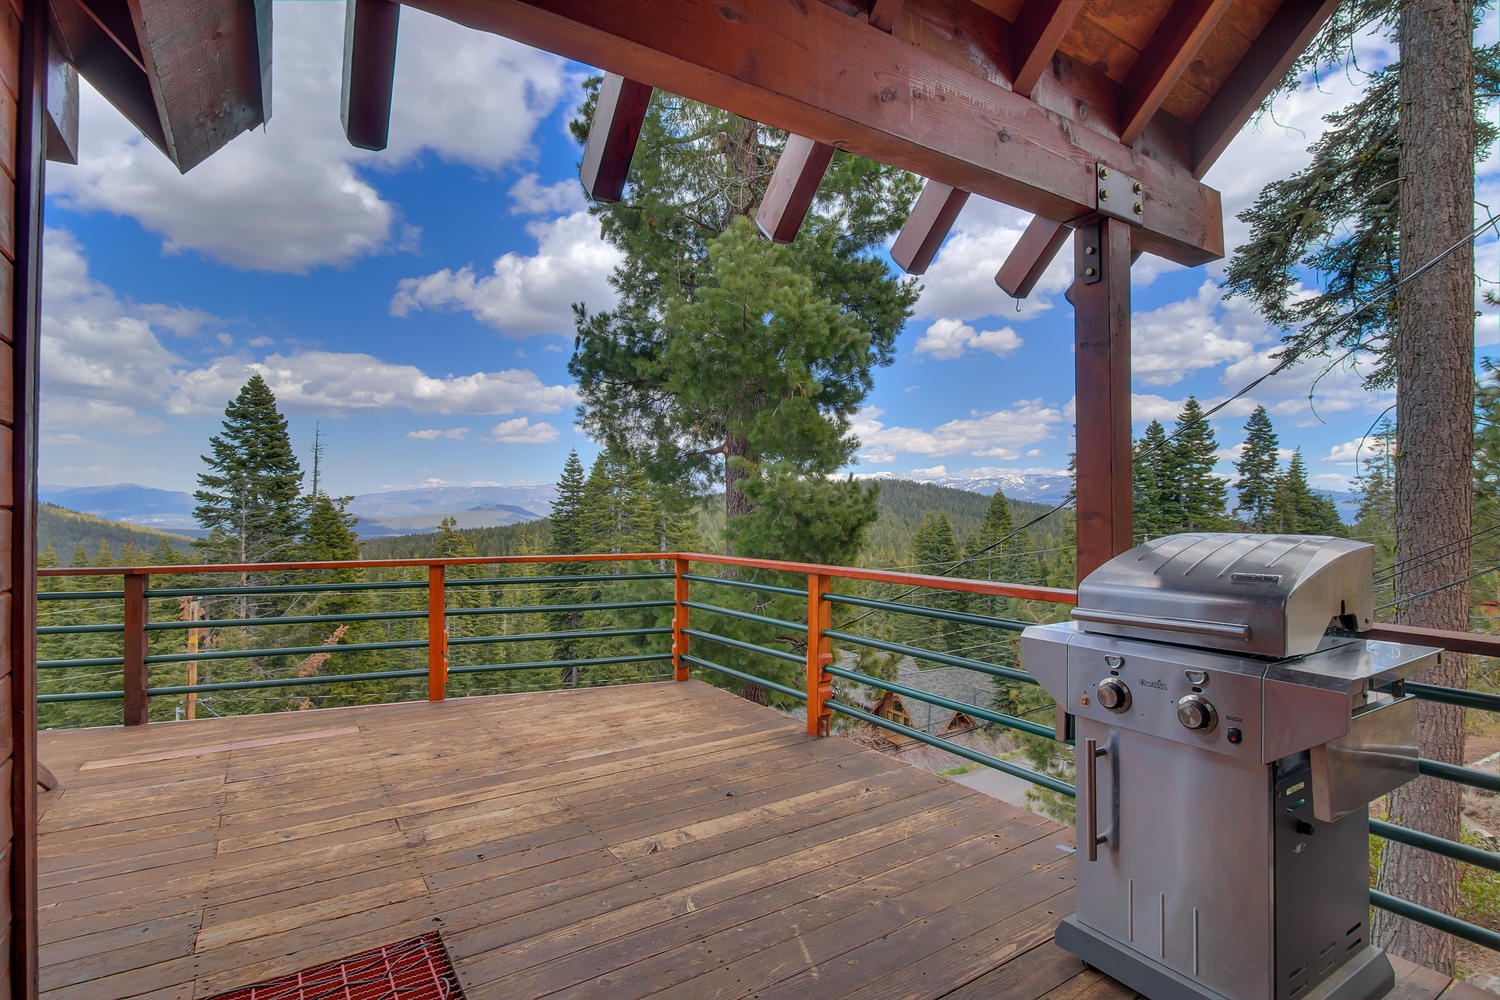 Deck with grill at this cabin in north lake tahoe: Falcon's Eye View Retreat